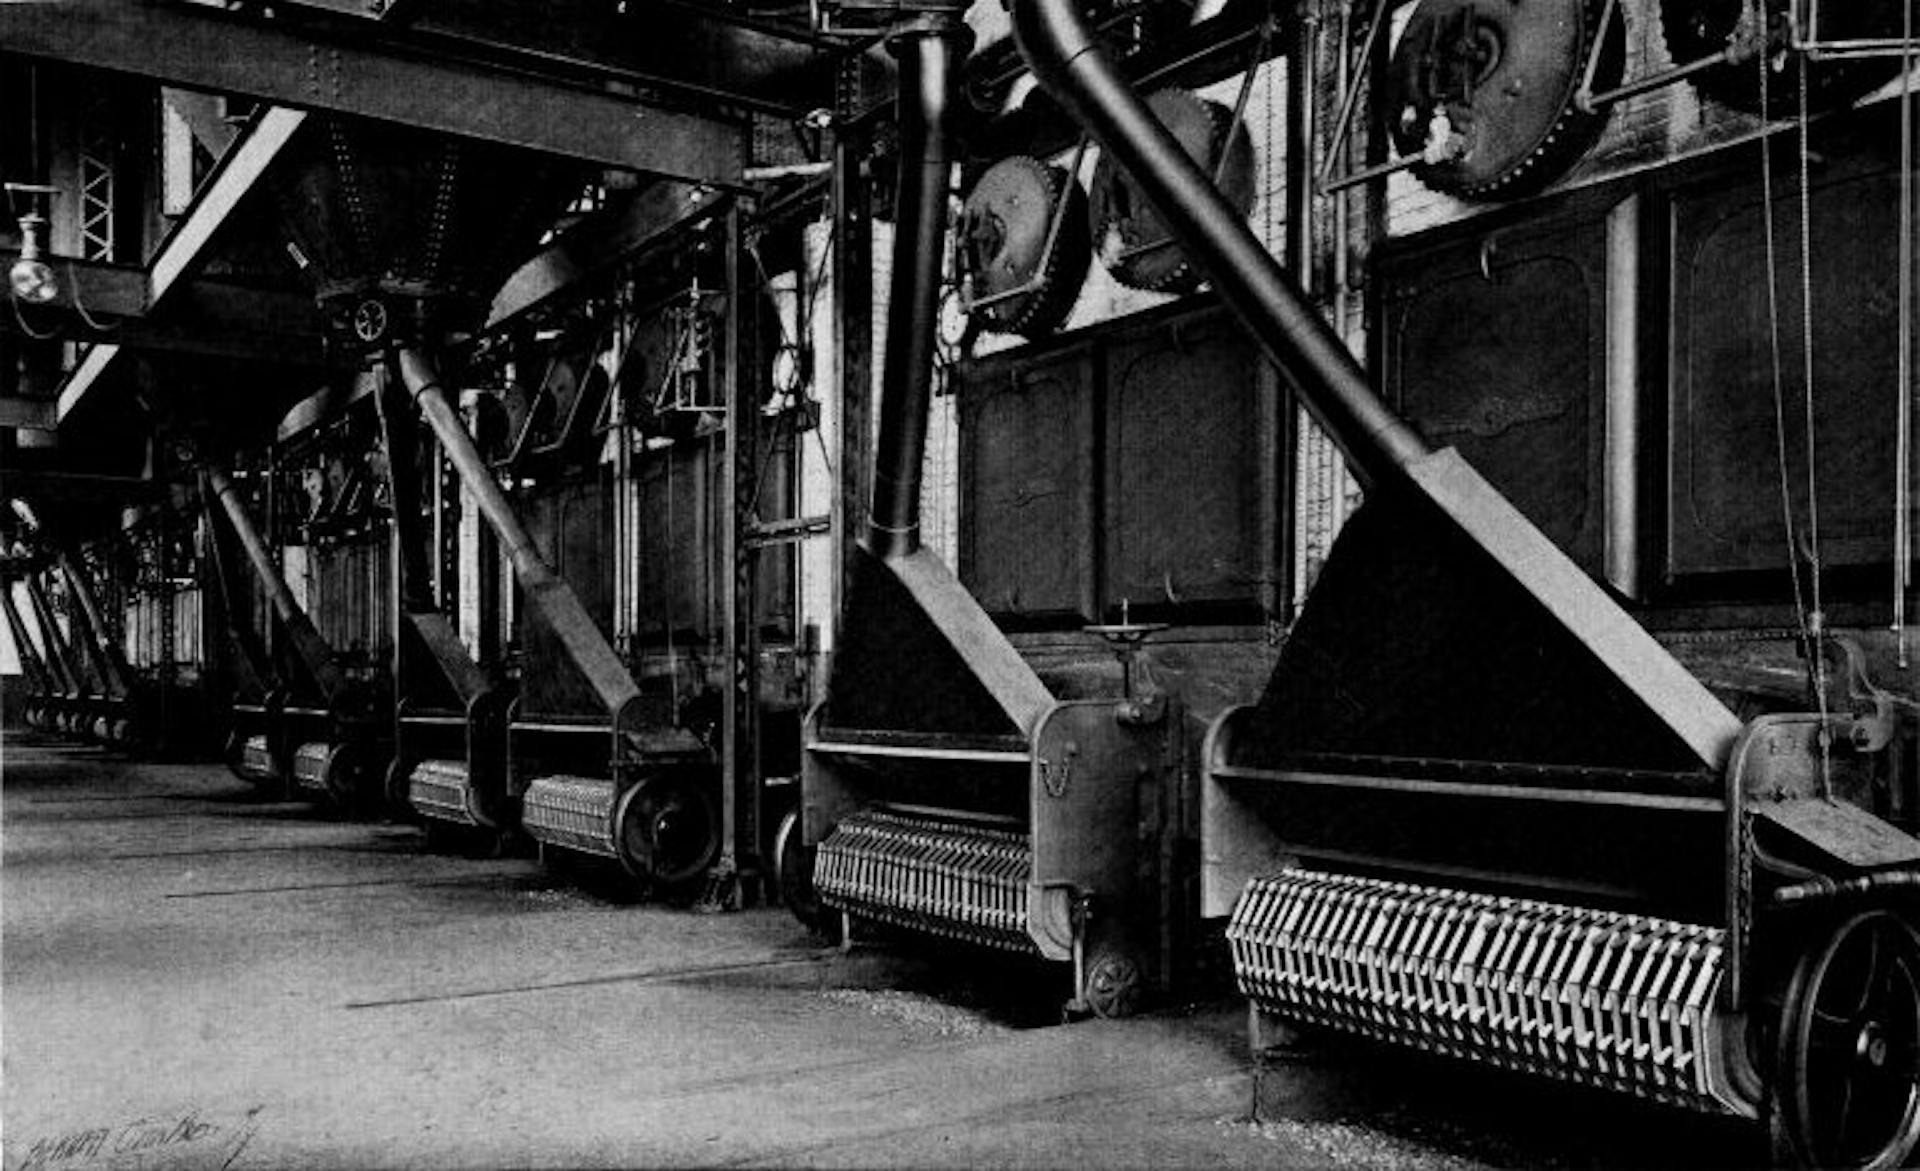 Portion of 15,000 Horse-power Installation of Babcock & Wilcox Boilers, Equipped with Babcock & Wilcox Chain Grate Stokers at the Northumberland, Pa., Plant of the Atlas Portland Cement Co. This Company Operates a Total of 24,000 Horse Power of Babcock & Wilcox Boilers in its Various Plants